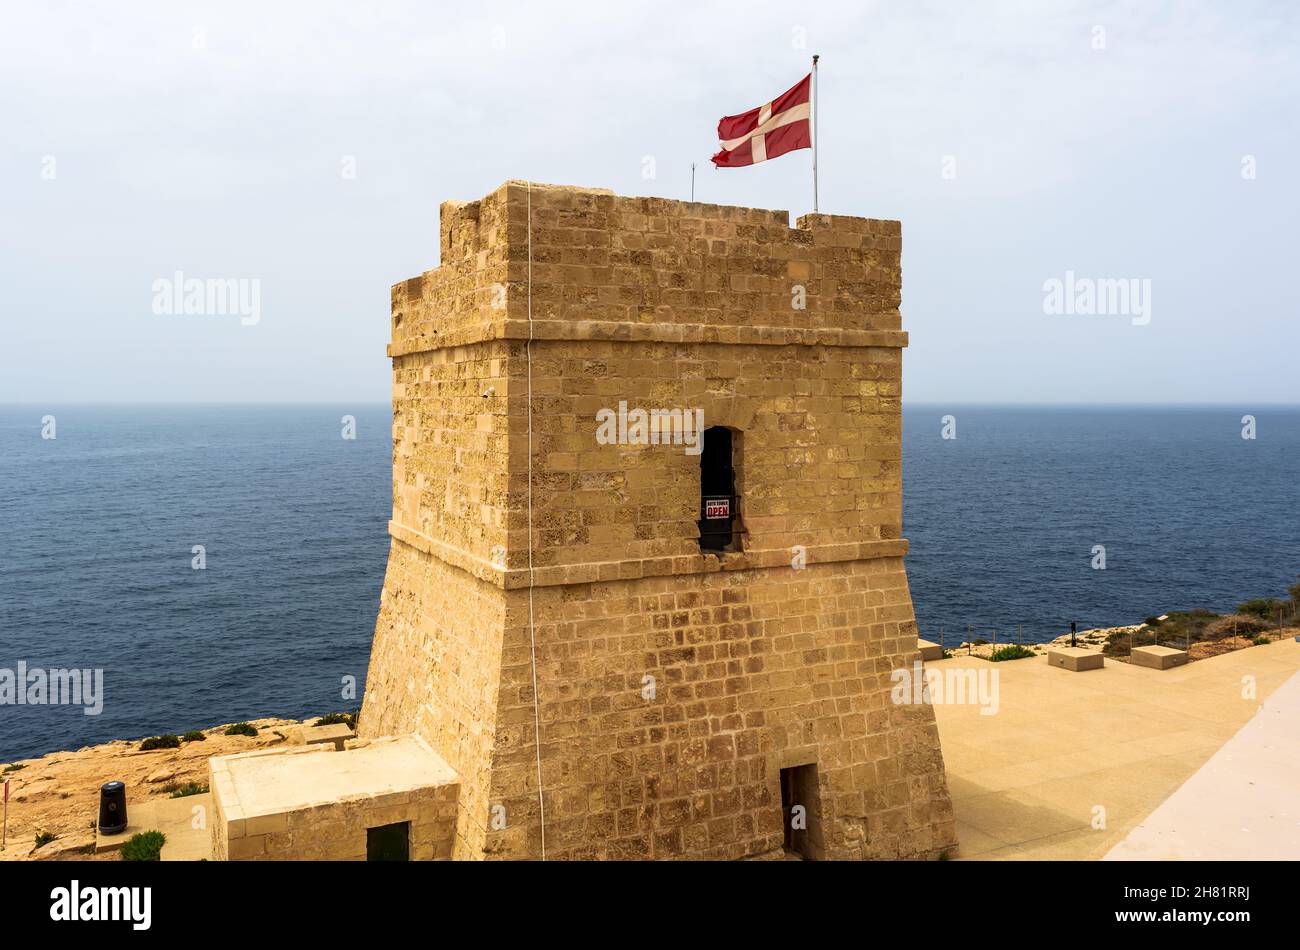 Sciuta Tower, or Wied iż-Żurrieq Tower, shot from the land. It is small watchtower in Qrendi, Malta. Stock Photo